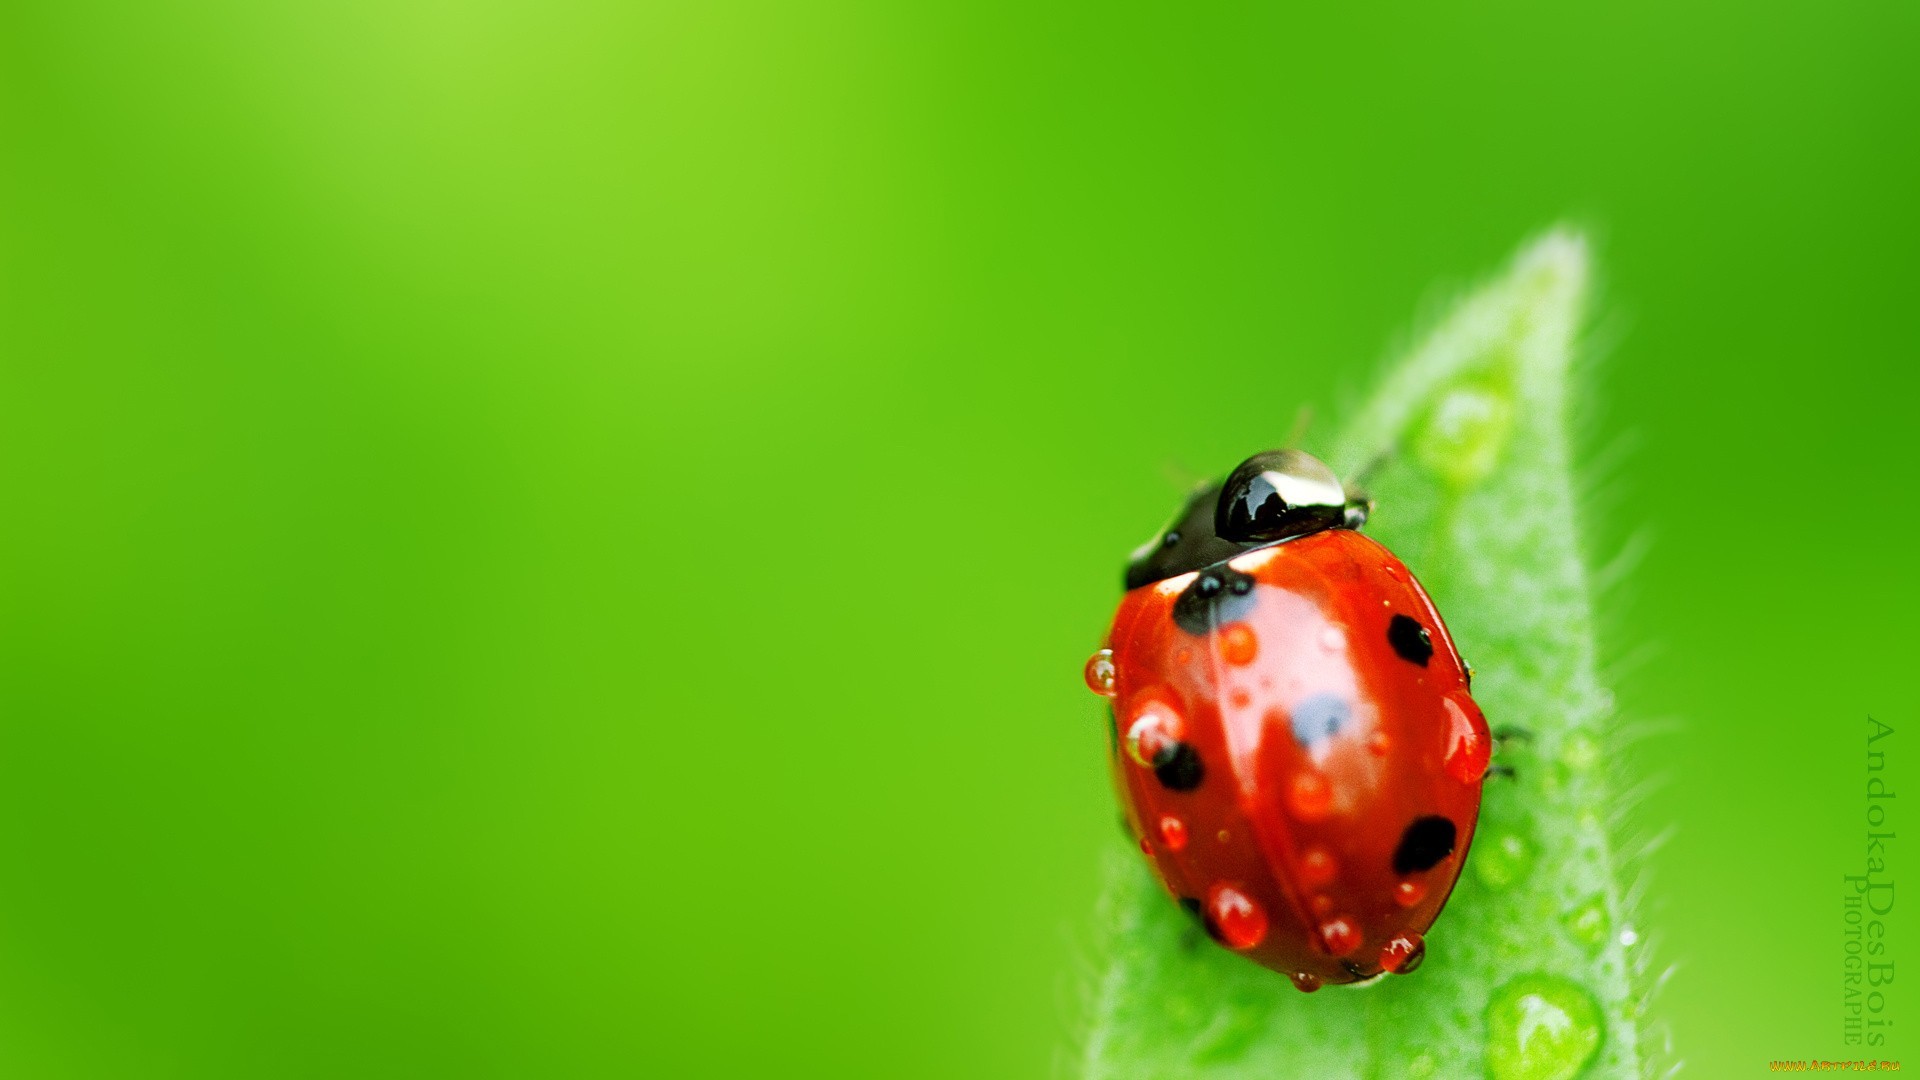 New Lock Screen Wallpapers insects, ladybugs, green